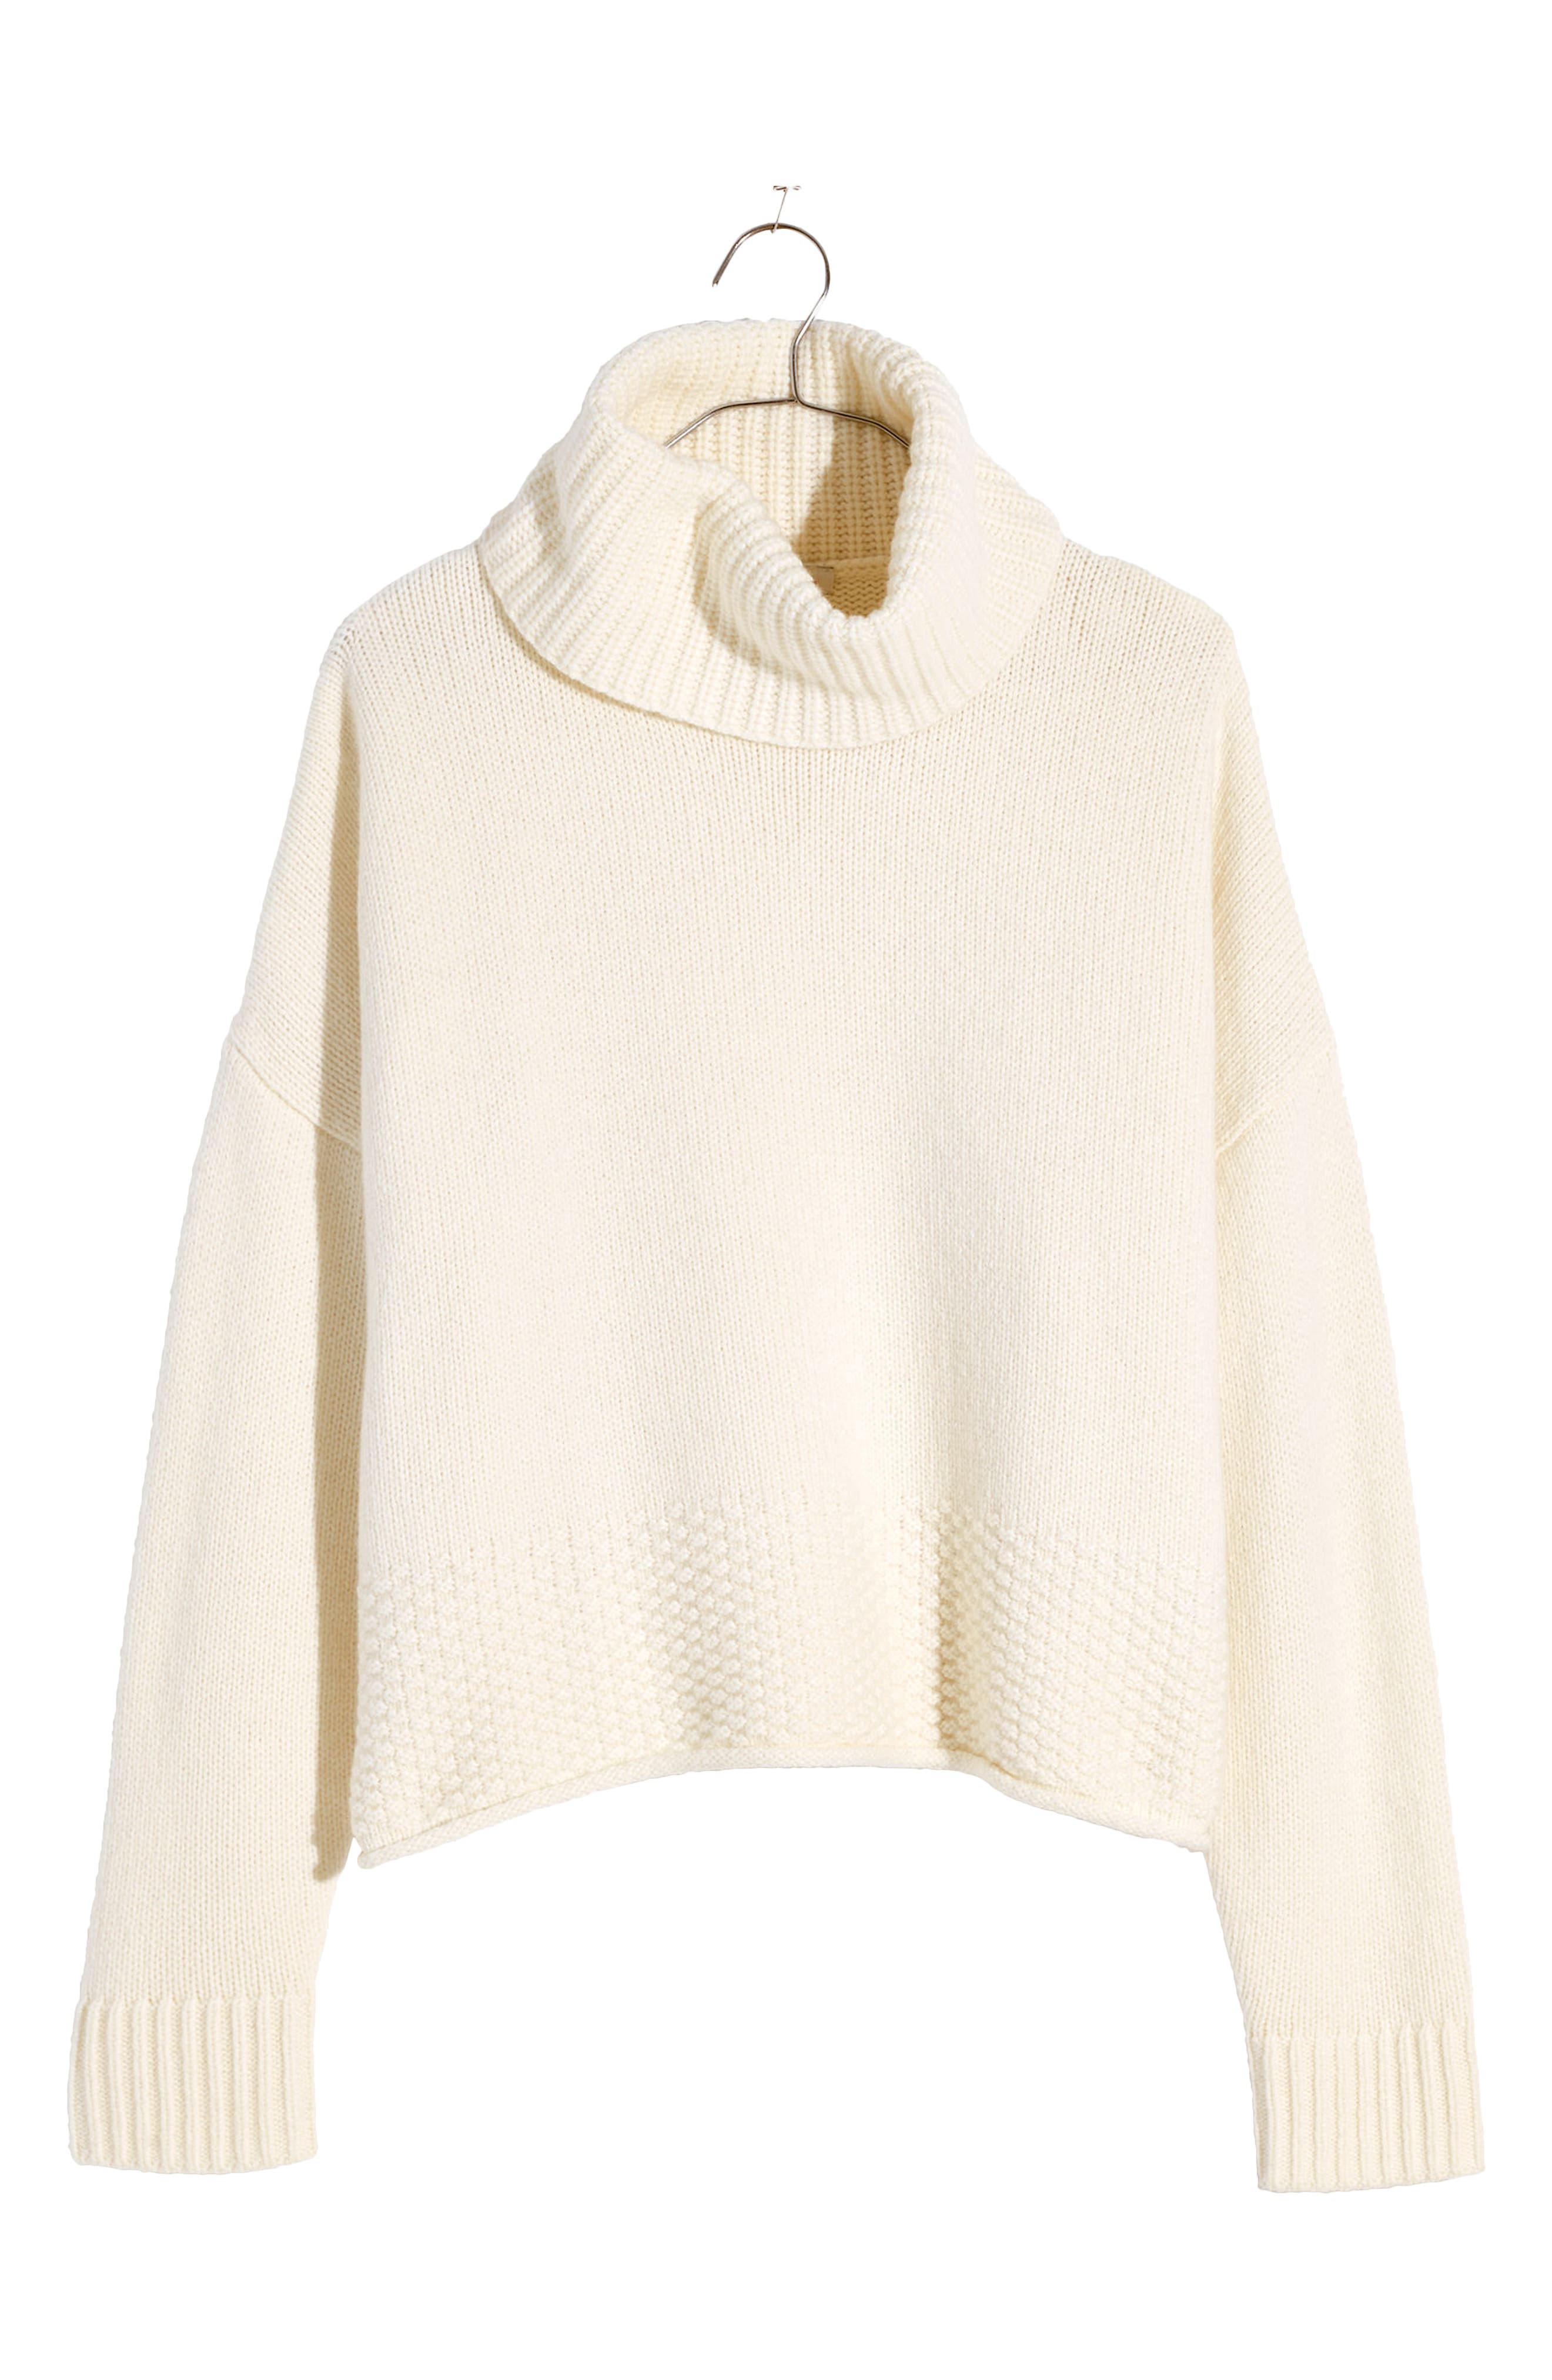 Jil Sander Oversized Sweater brown-natural white striped pattern casual look Fashion Sweaters Oversized Sweaters 